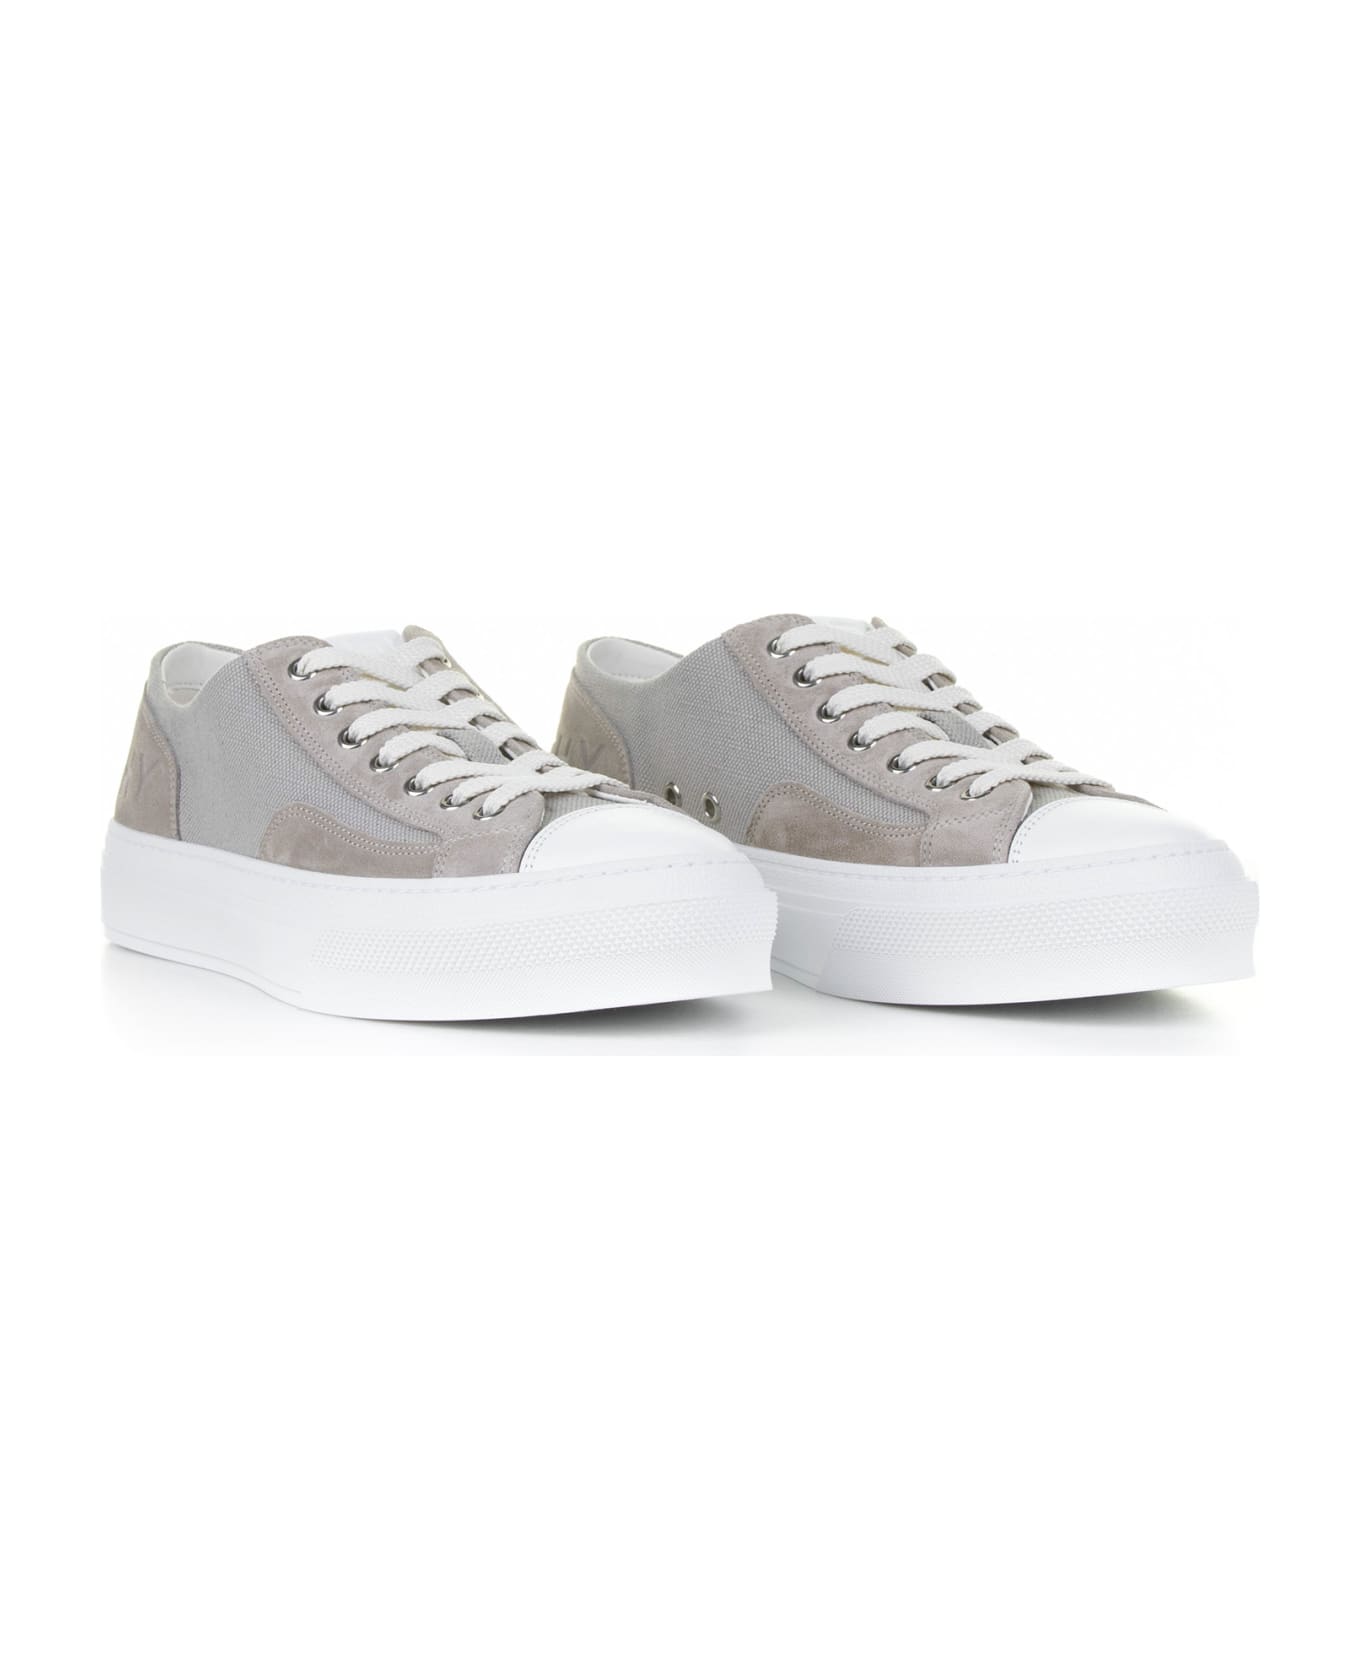 Givenchy City Low Sneakers - MEDIUM GREY